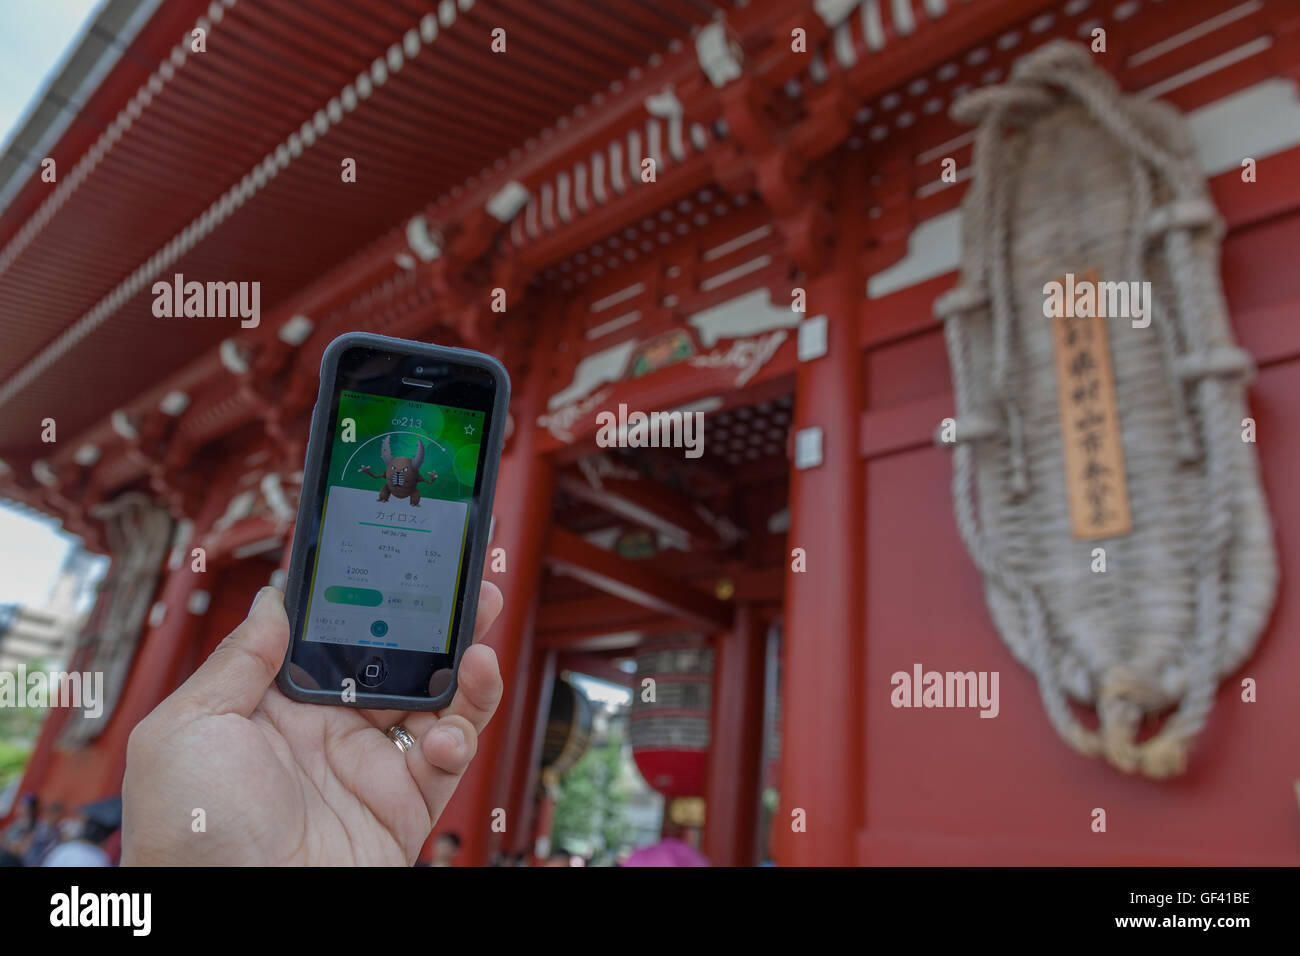 A Man Shows The Pokemon Character Pinsir Catch At The Entrance Of The Sensoji Temple In Asakusa On July 28 16 Tokyo Japan Within Three Days Of The Launch Of Pokemon Go